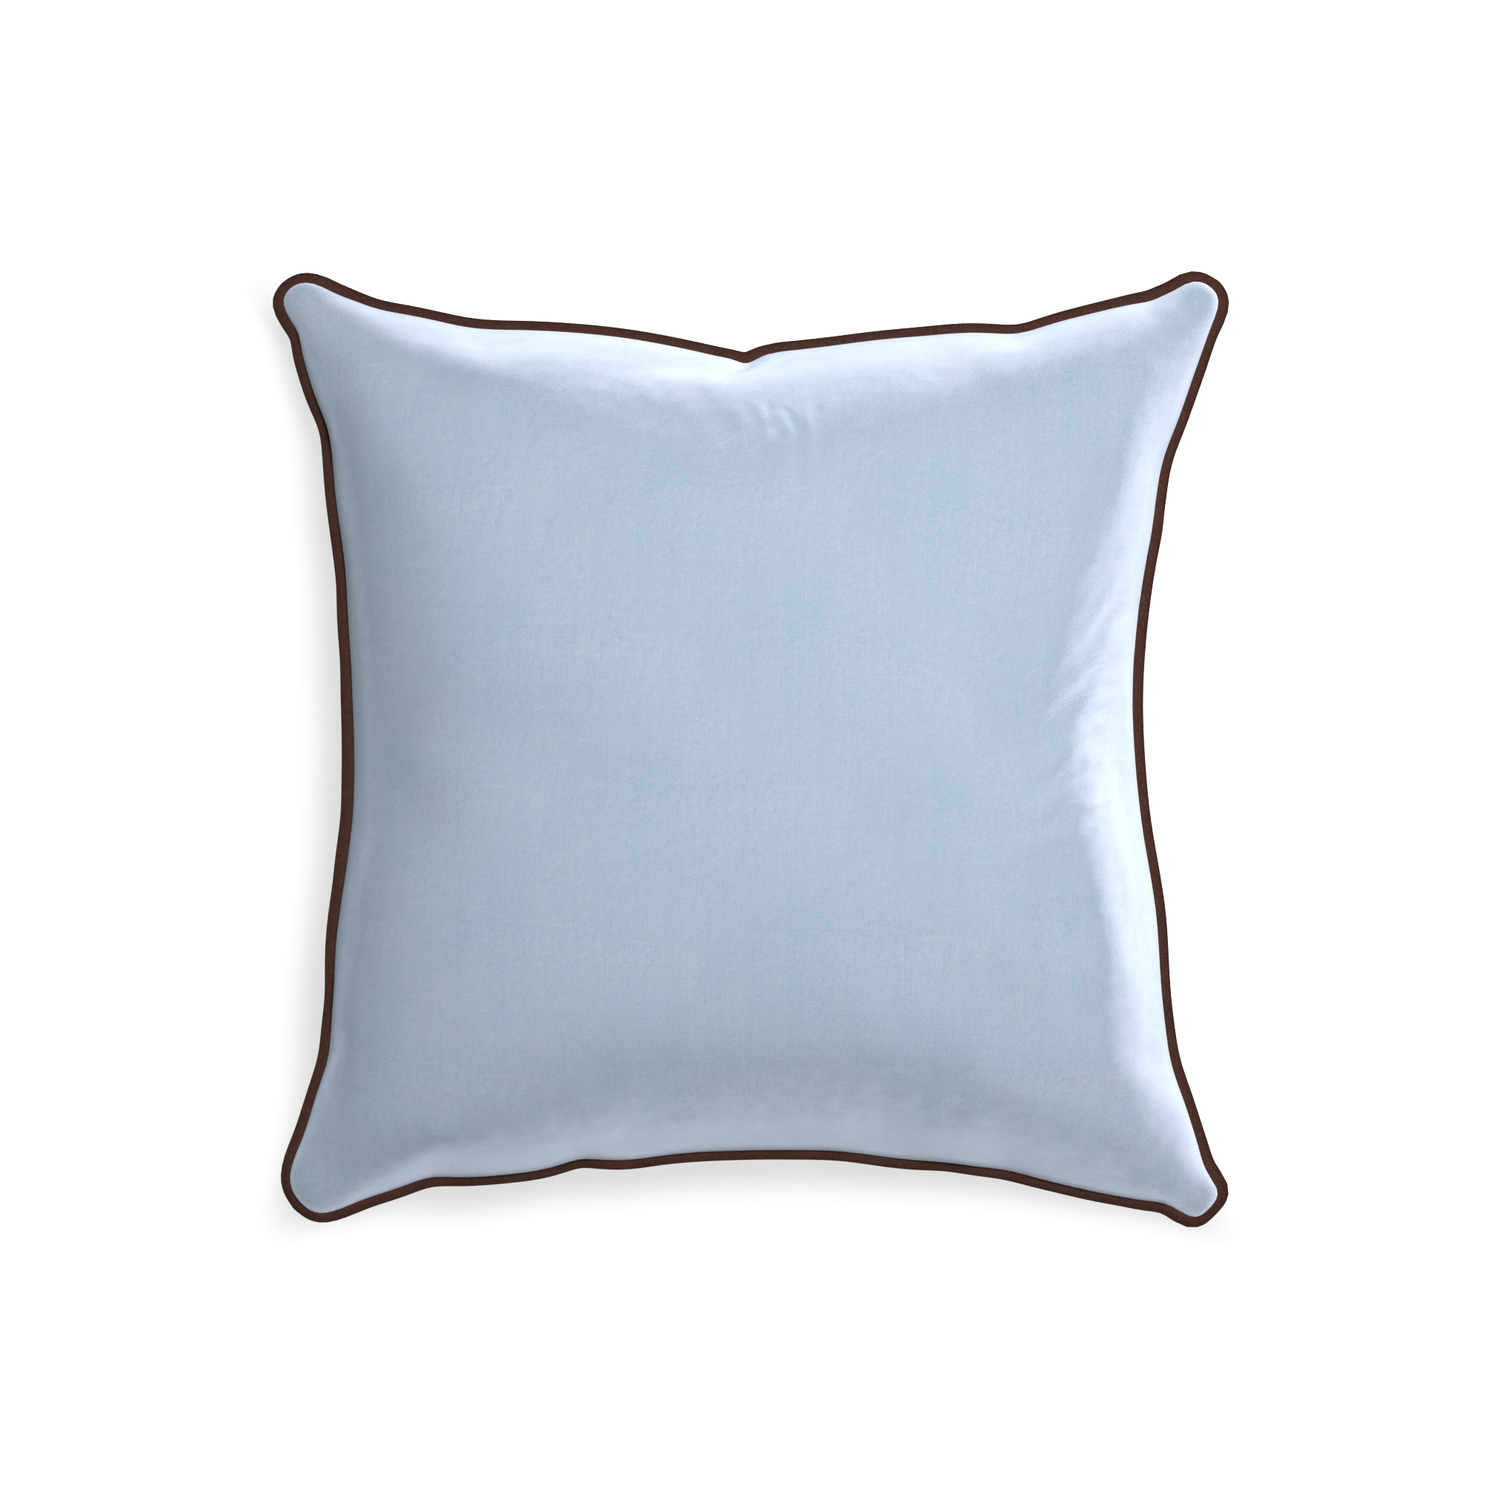 square light blue velvet pillow with brown piping